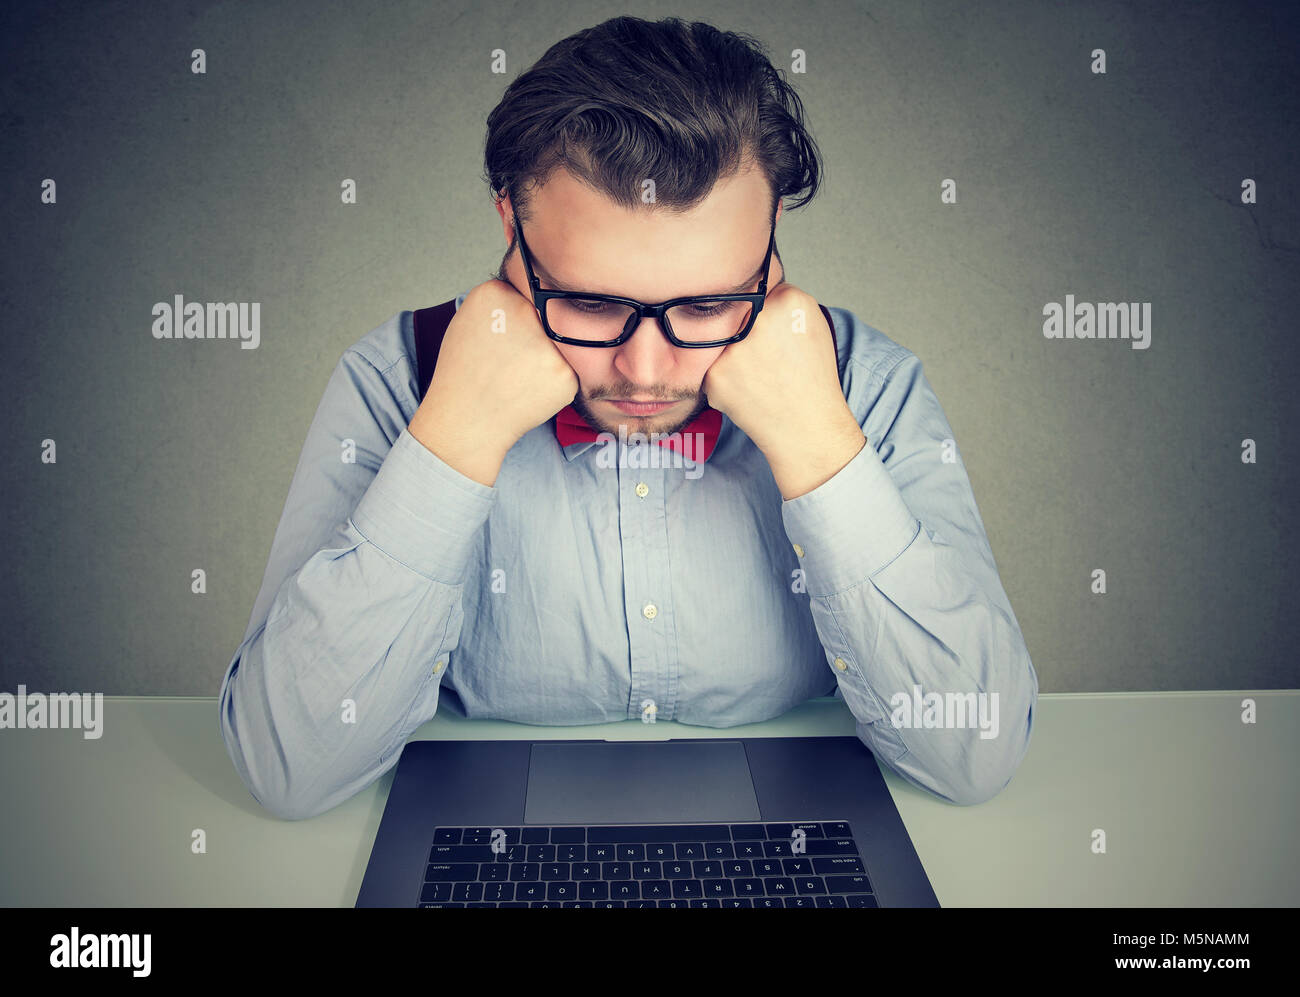 Bored business man with no motivation sitting at desk with laptop computer Stock Photo